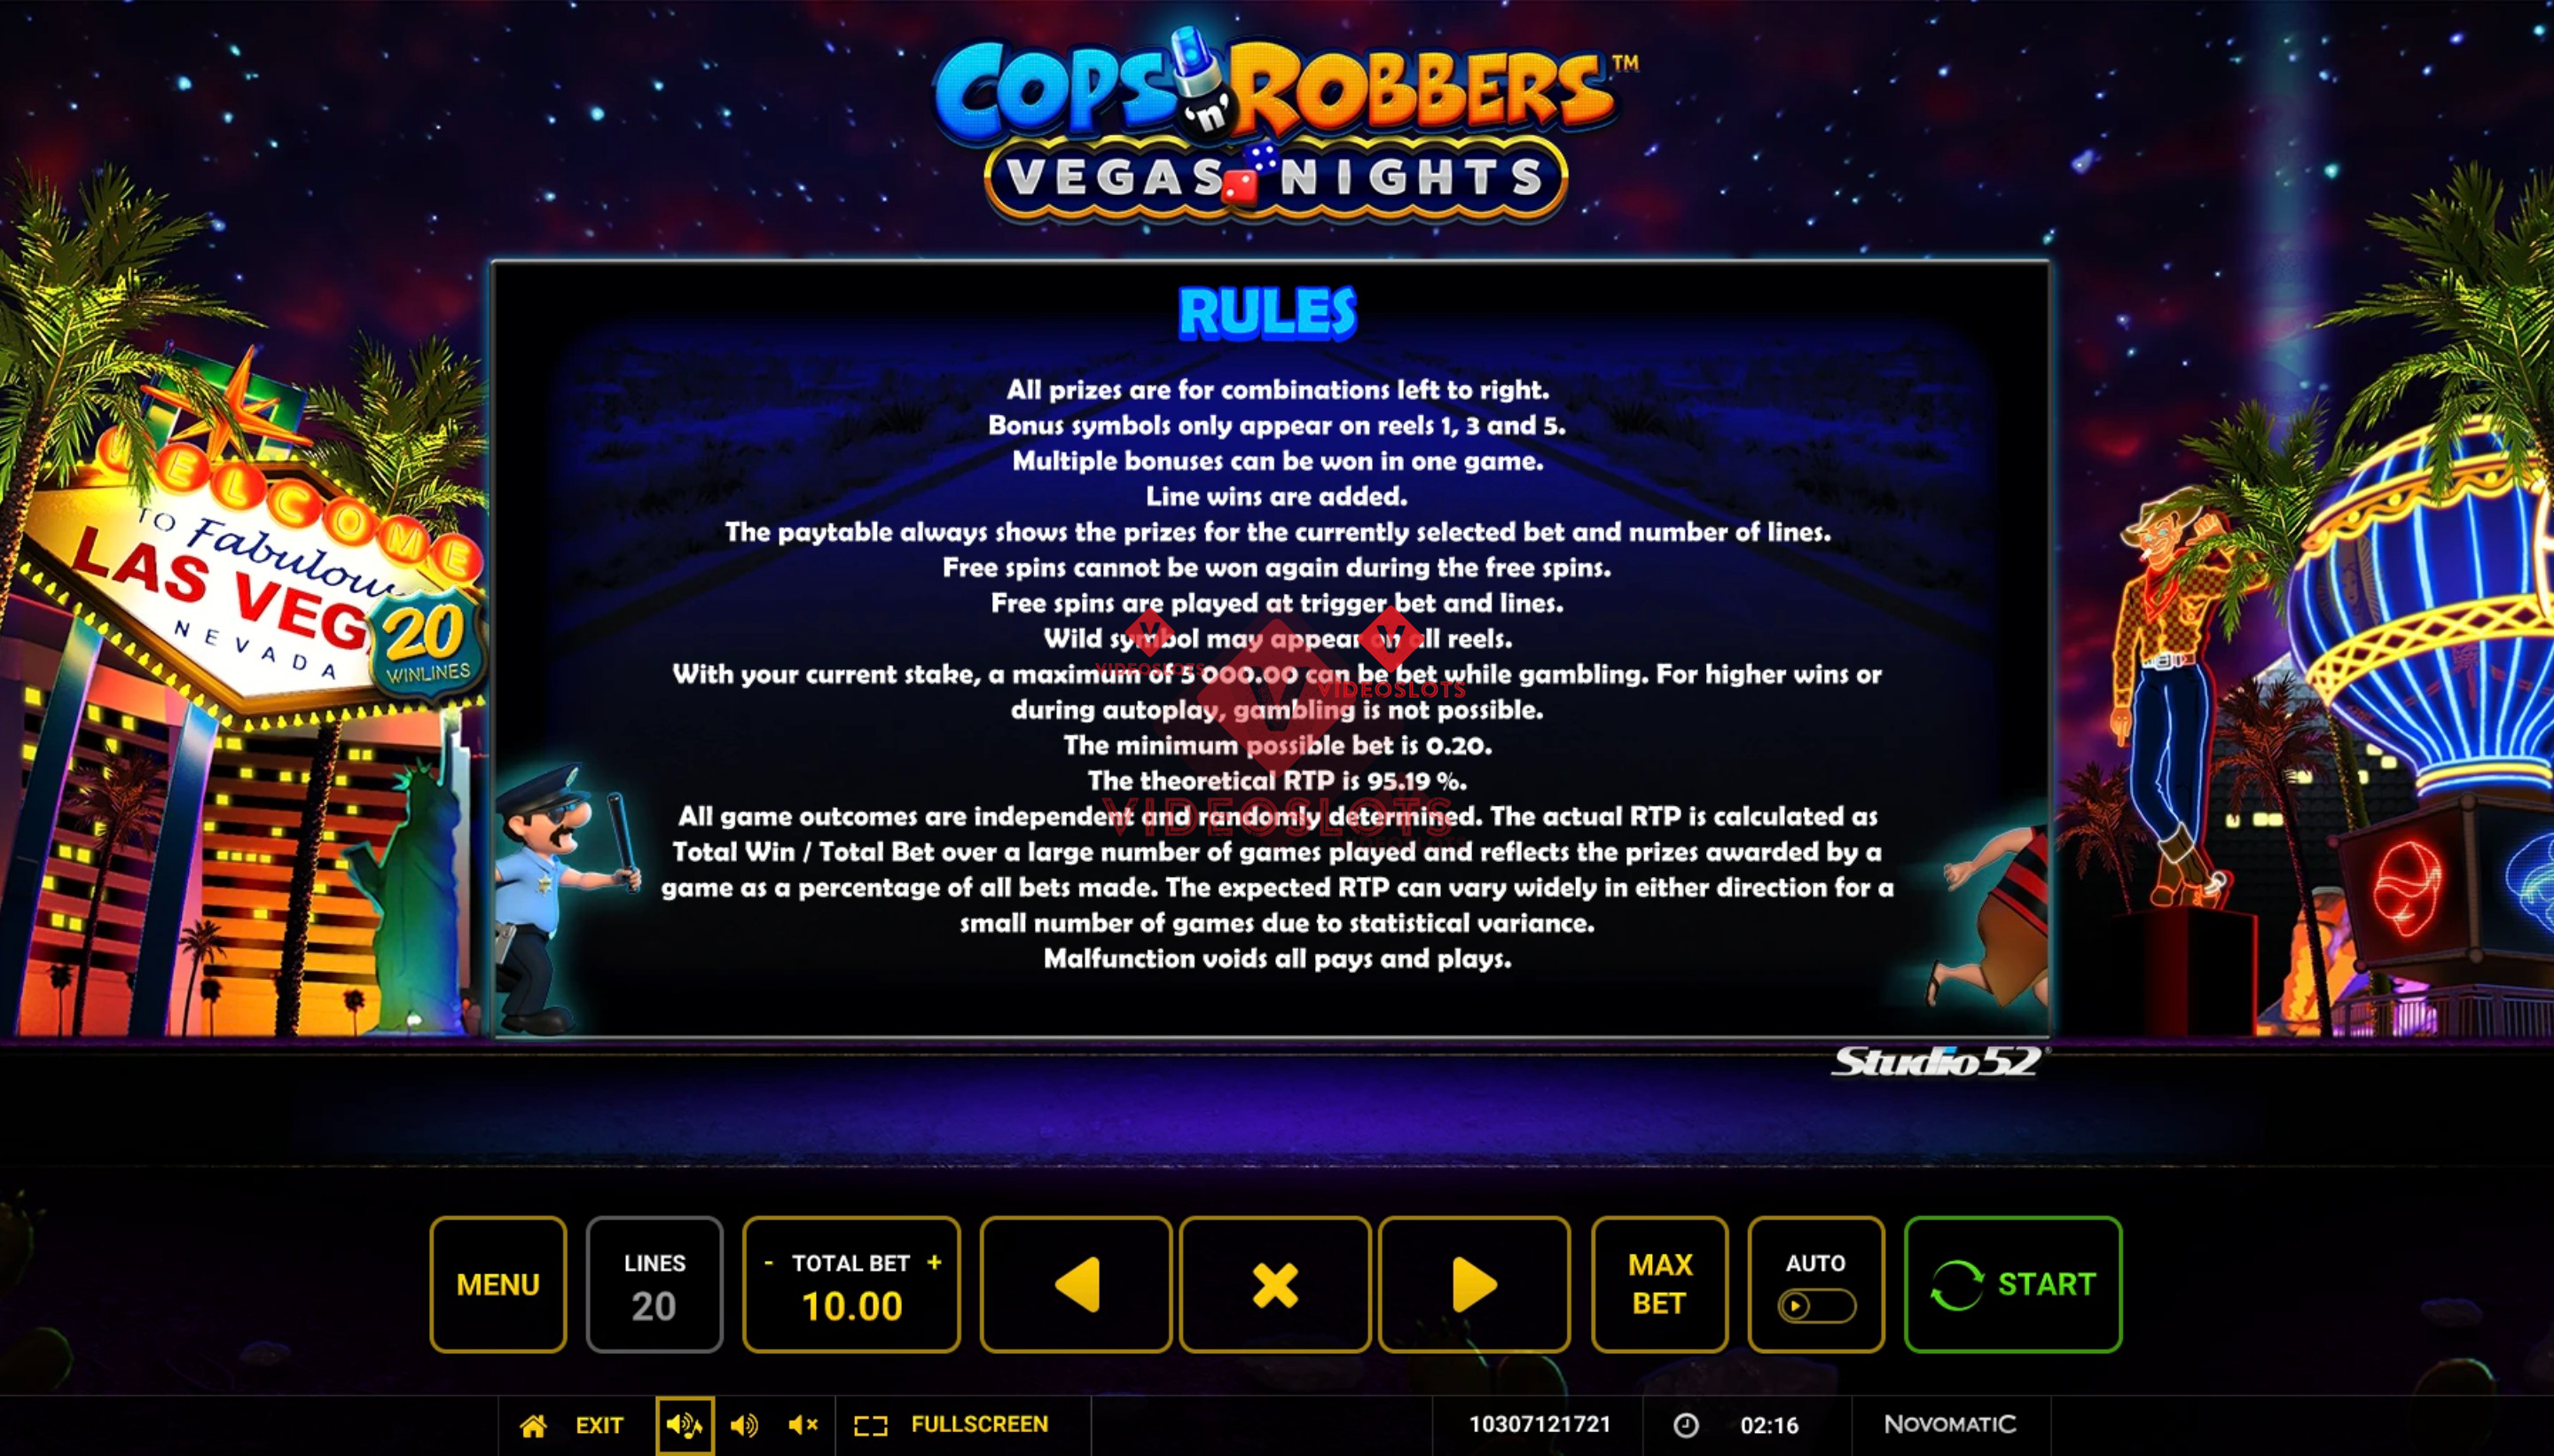 Game Rules for Cops 'n' Robbers Vegas Nights slot from Greentube